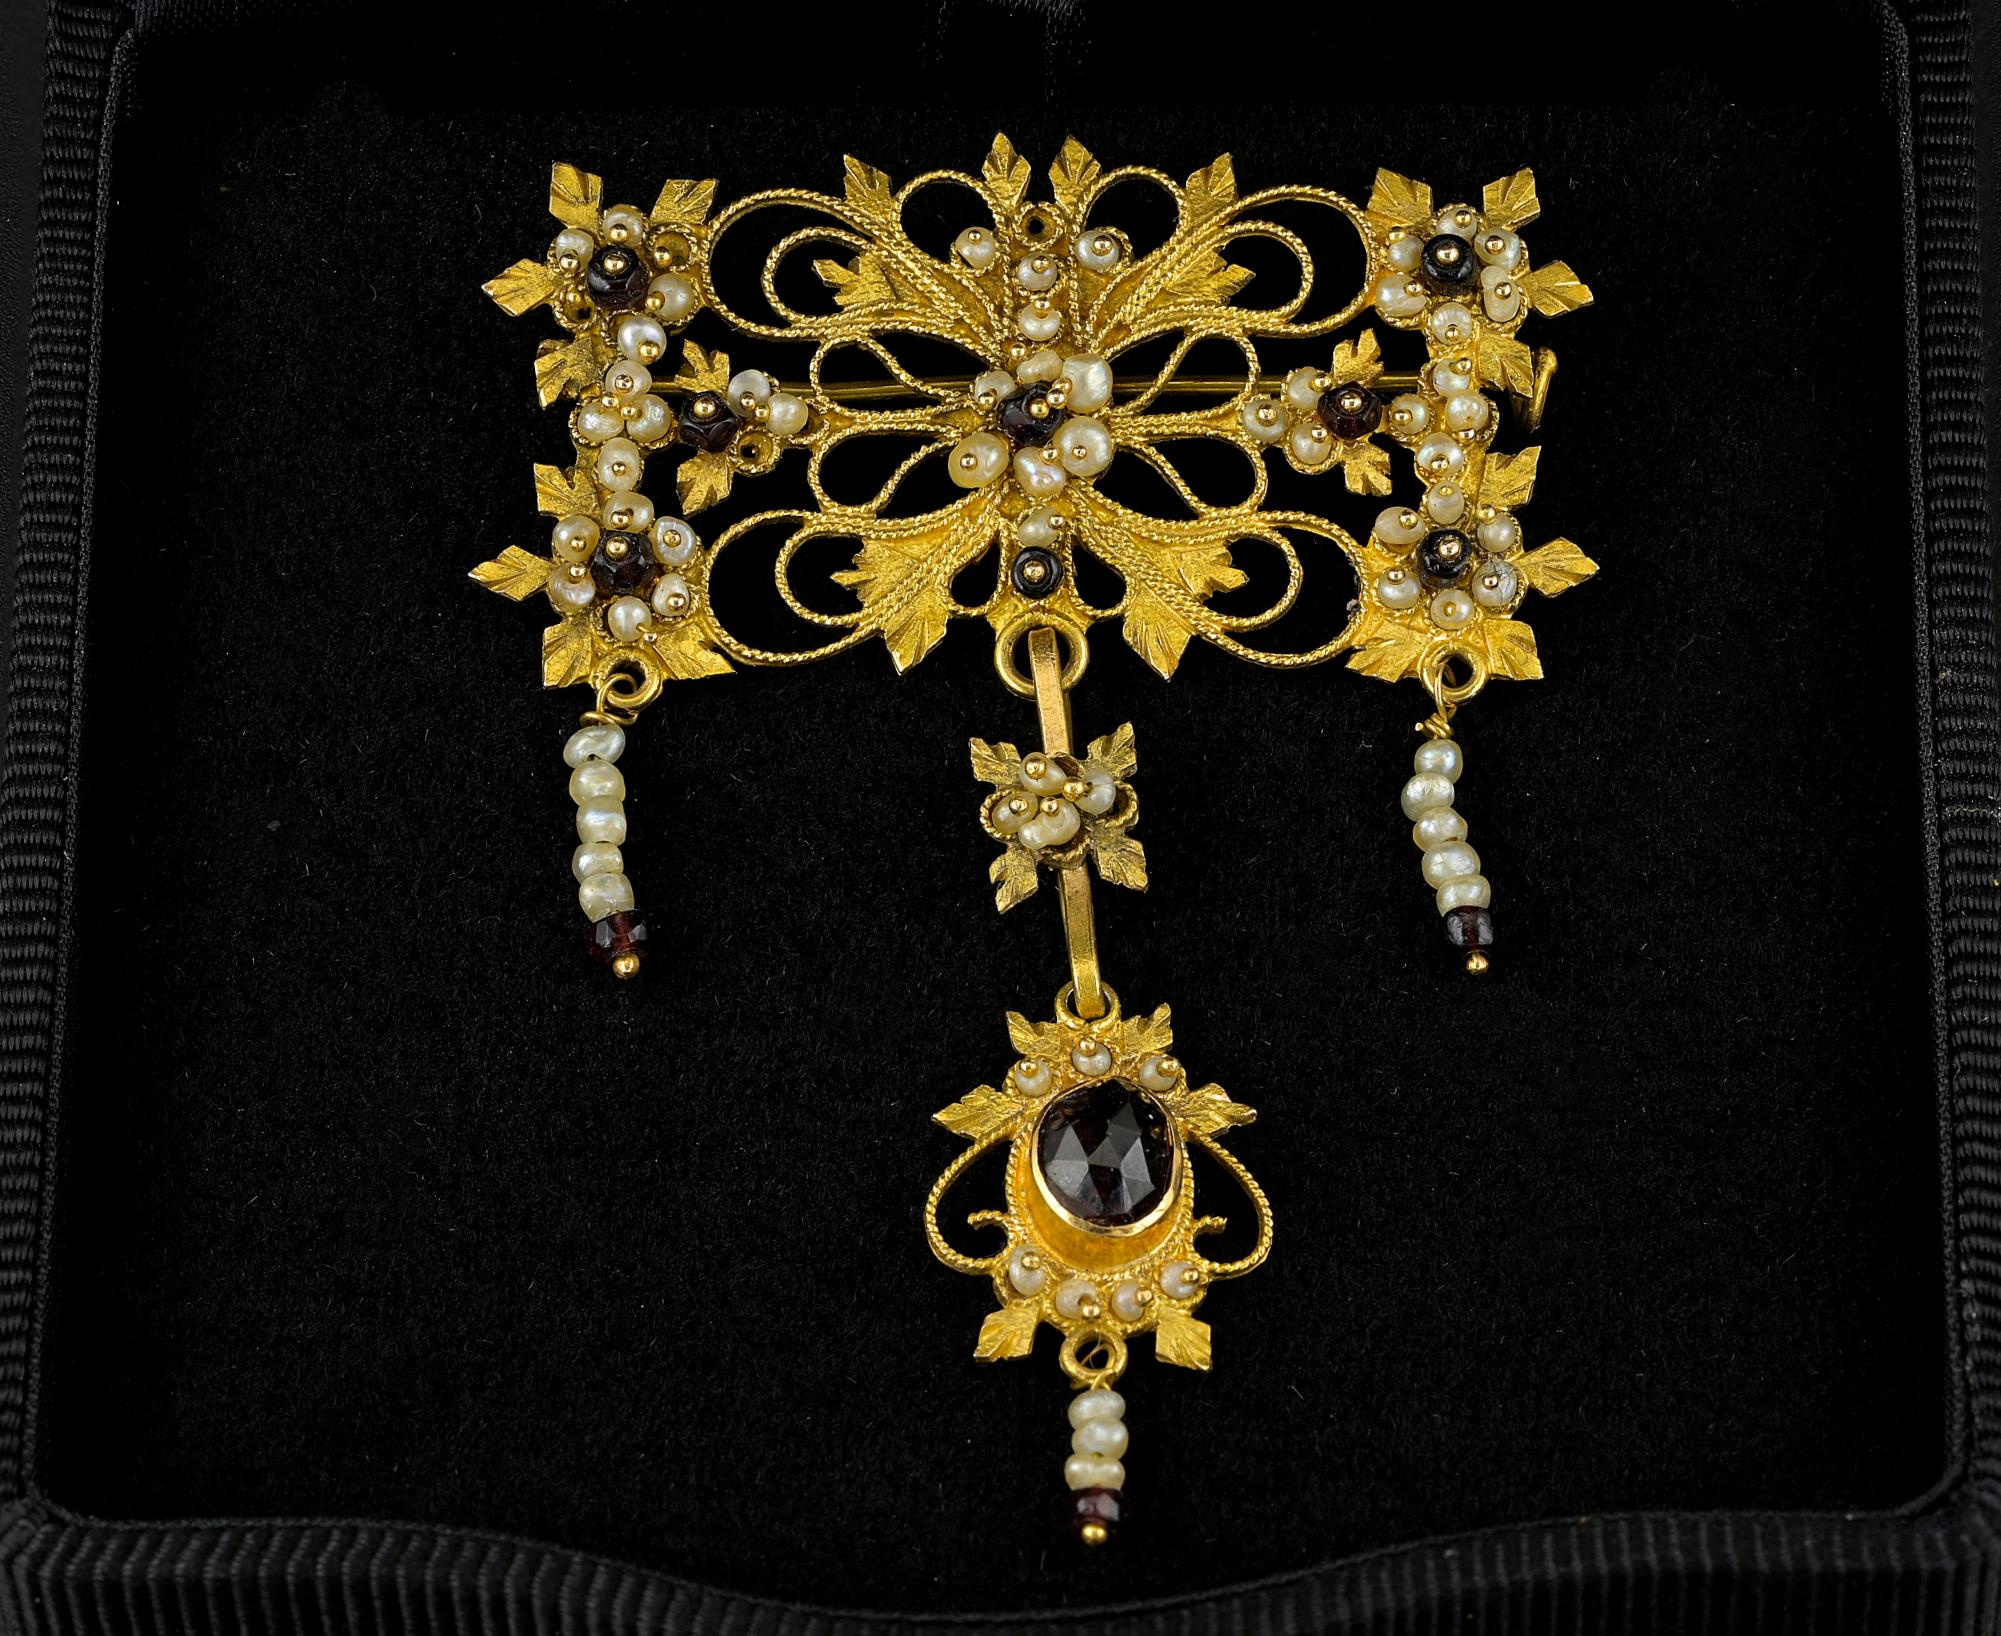 This stunning Georgian period pendant brooch is 1790 ca
The fine elaborated Canetille work is elegantly shaped as a bow with a suspending drop further enriched by Natural not nucleated Pearls and Bohemian Garnets
Can be worn either as brooch or as